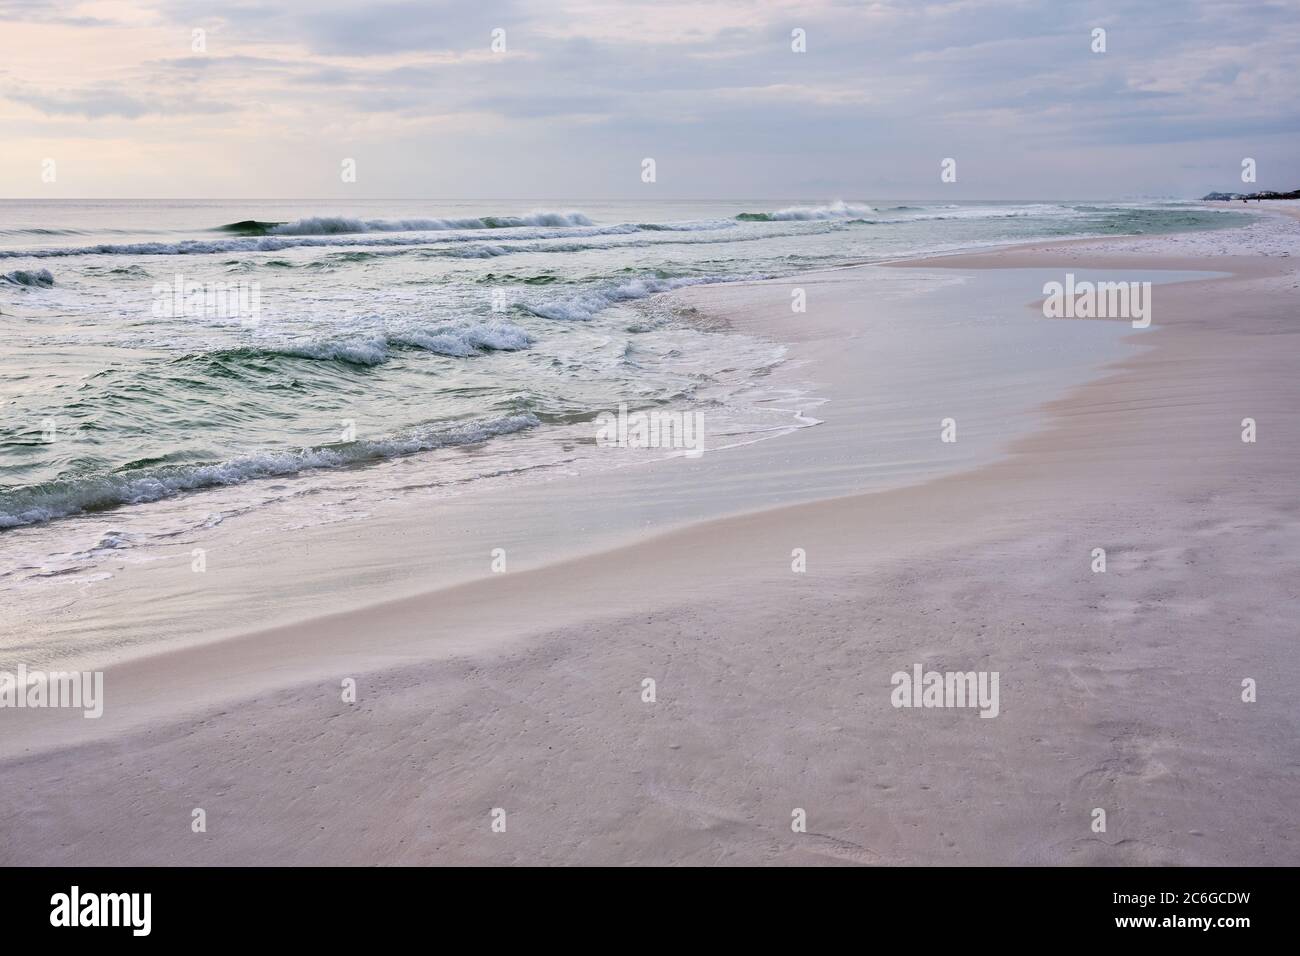 Emerald waters of the Gulf of Mexico meet white sand of Destin, Florida creating a tranquil seascape in pastel tones. Stock Photo